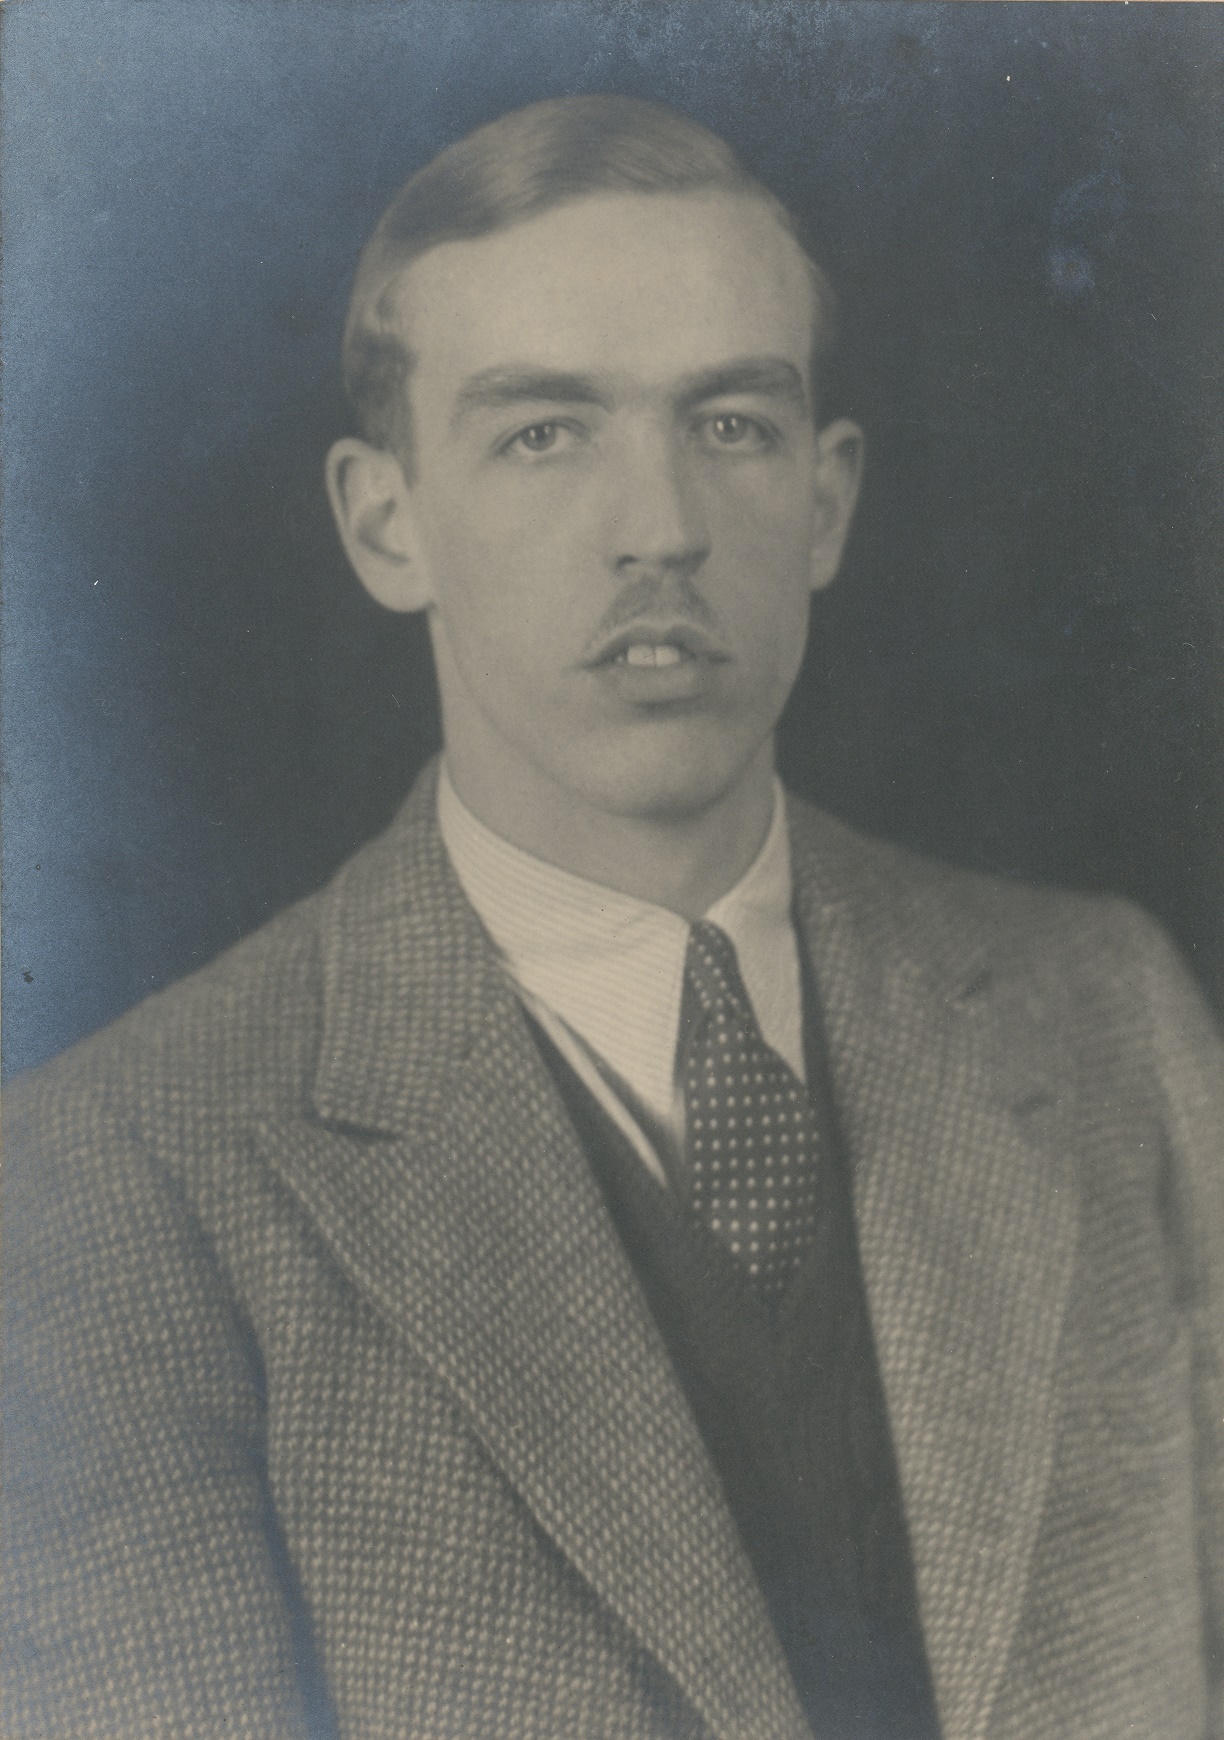 A black and white photograph of Robert John Brooke Gill, taken sometime in the 1940s when aged in his 30s.